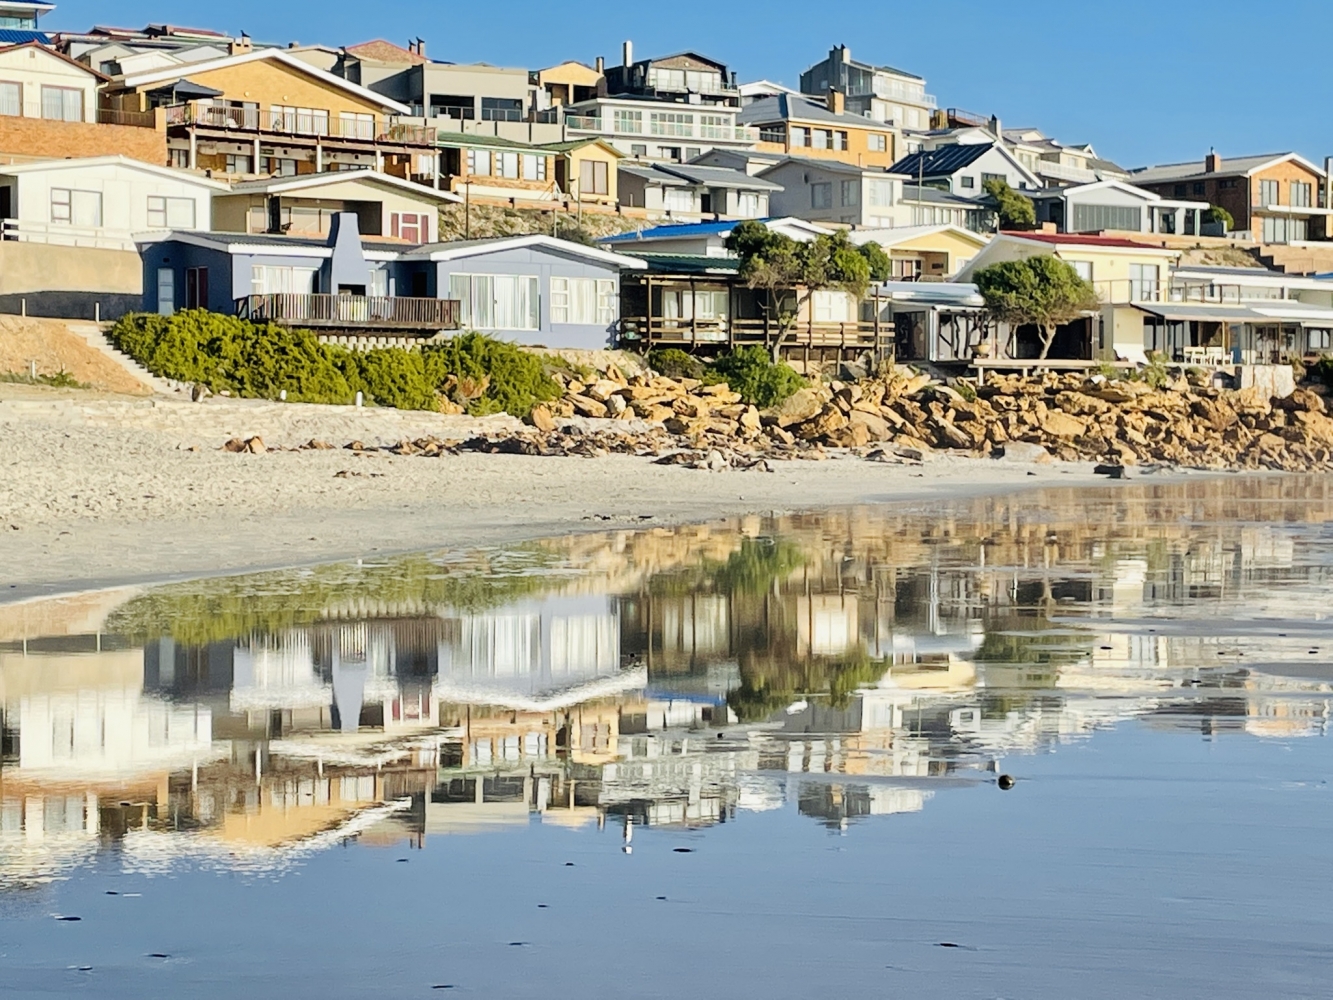 Two Nights In Strandfontein A Reflection 